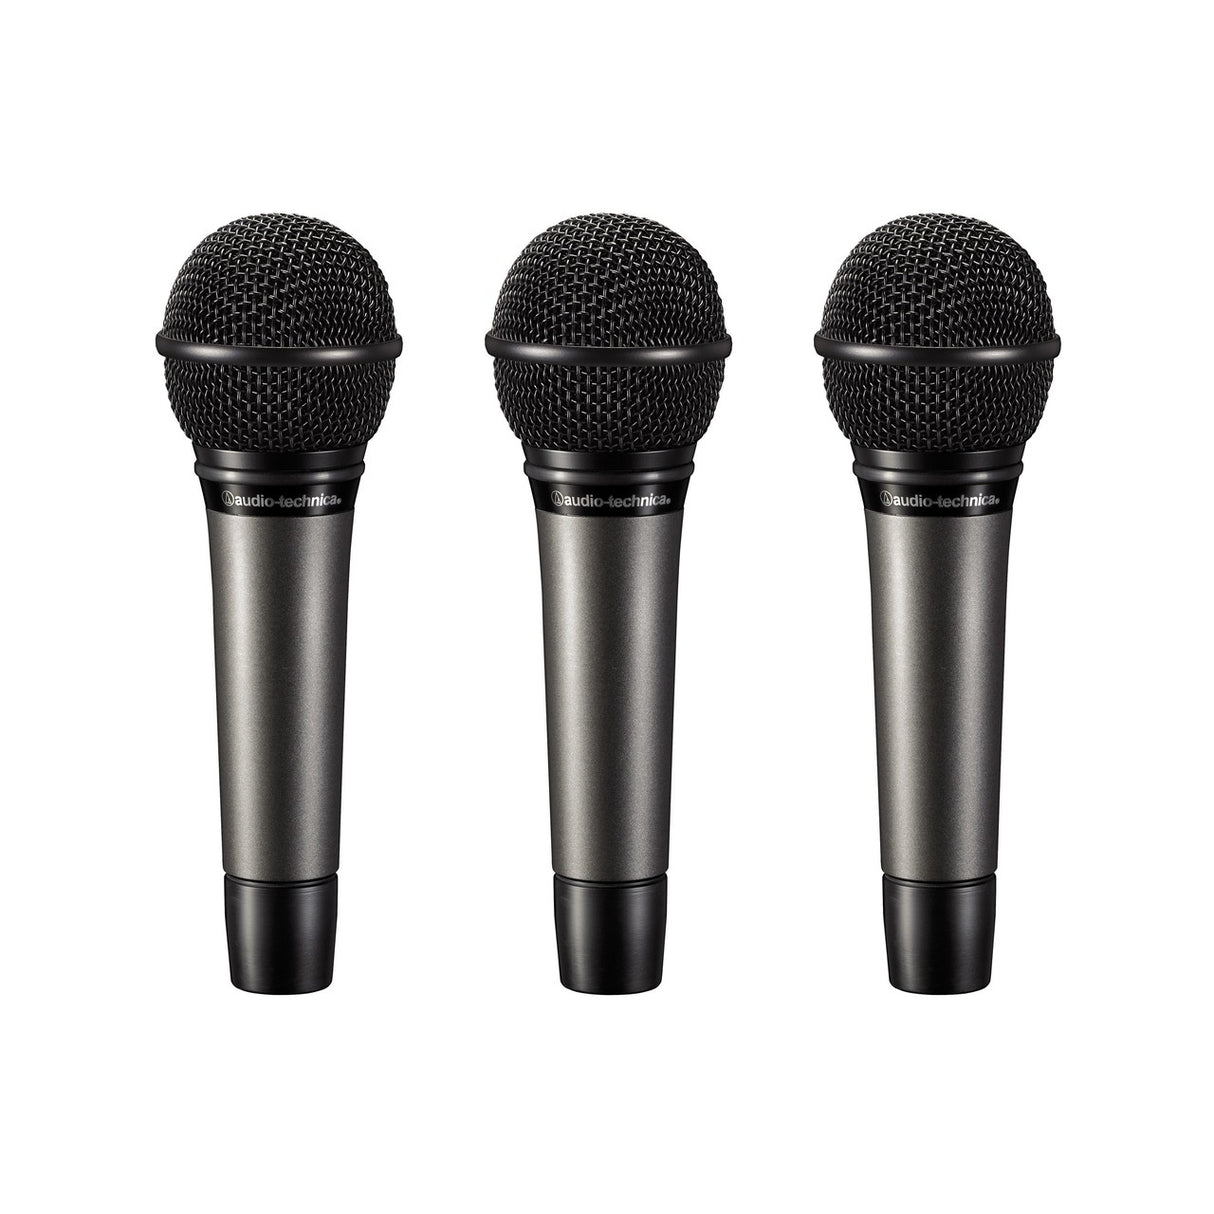 Audio Technica ATM510PK | Cardioid Dynamic Handheld Vocal Microphone Pack